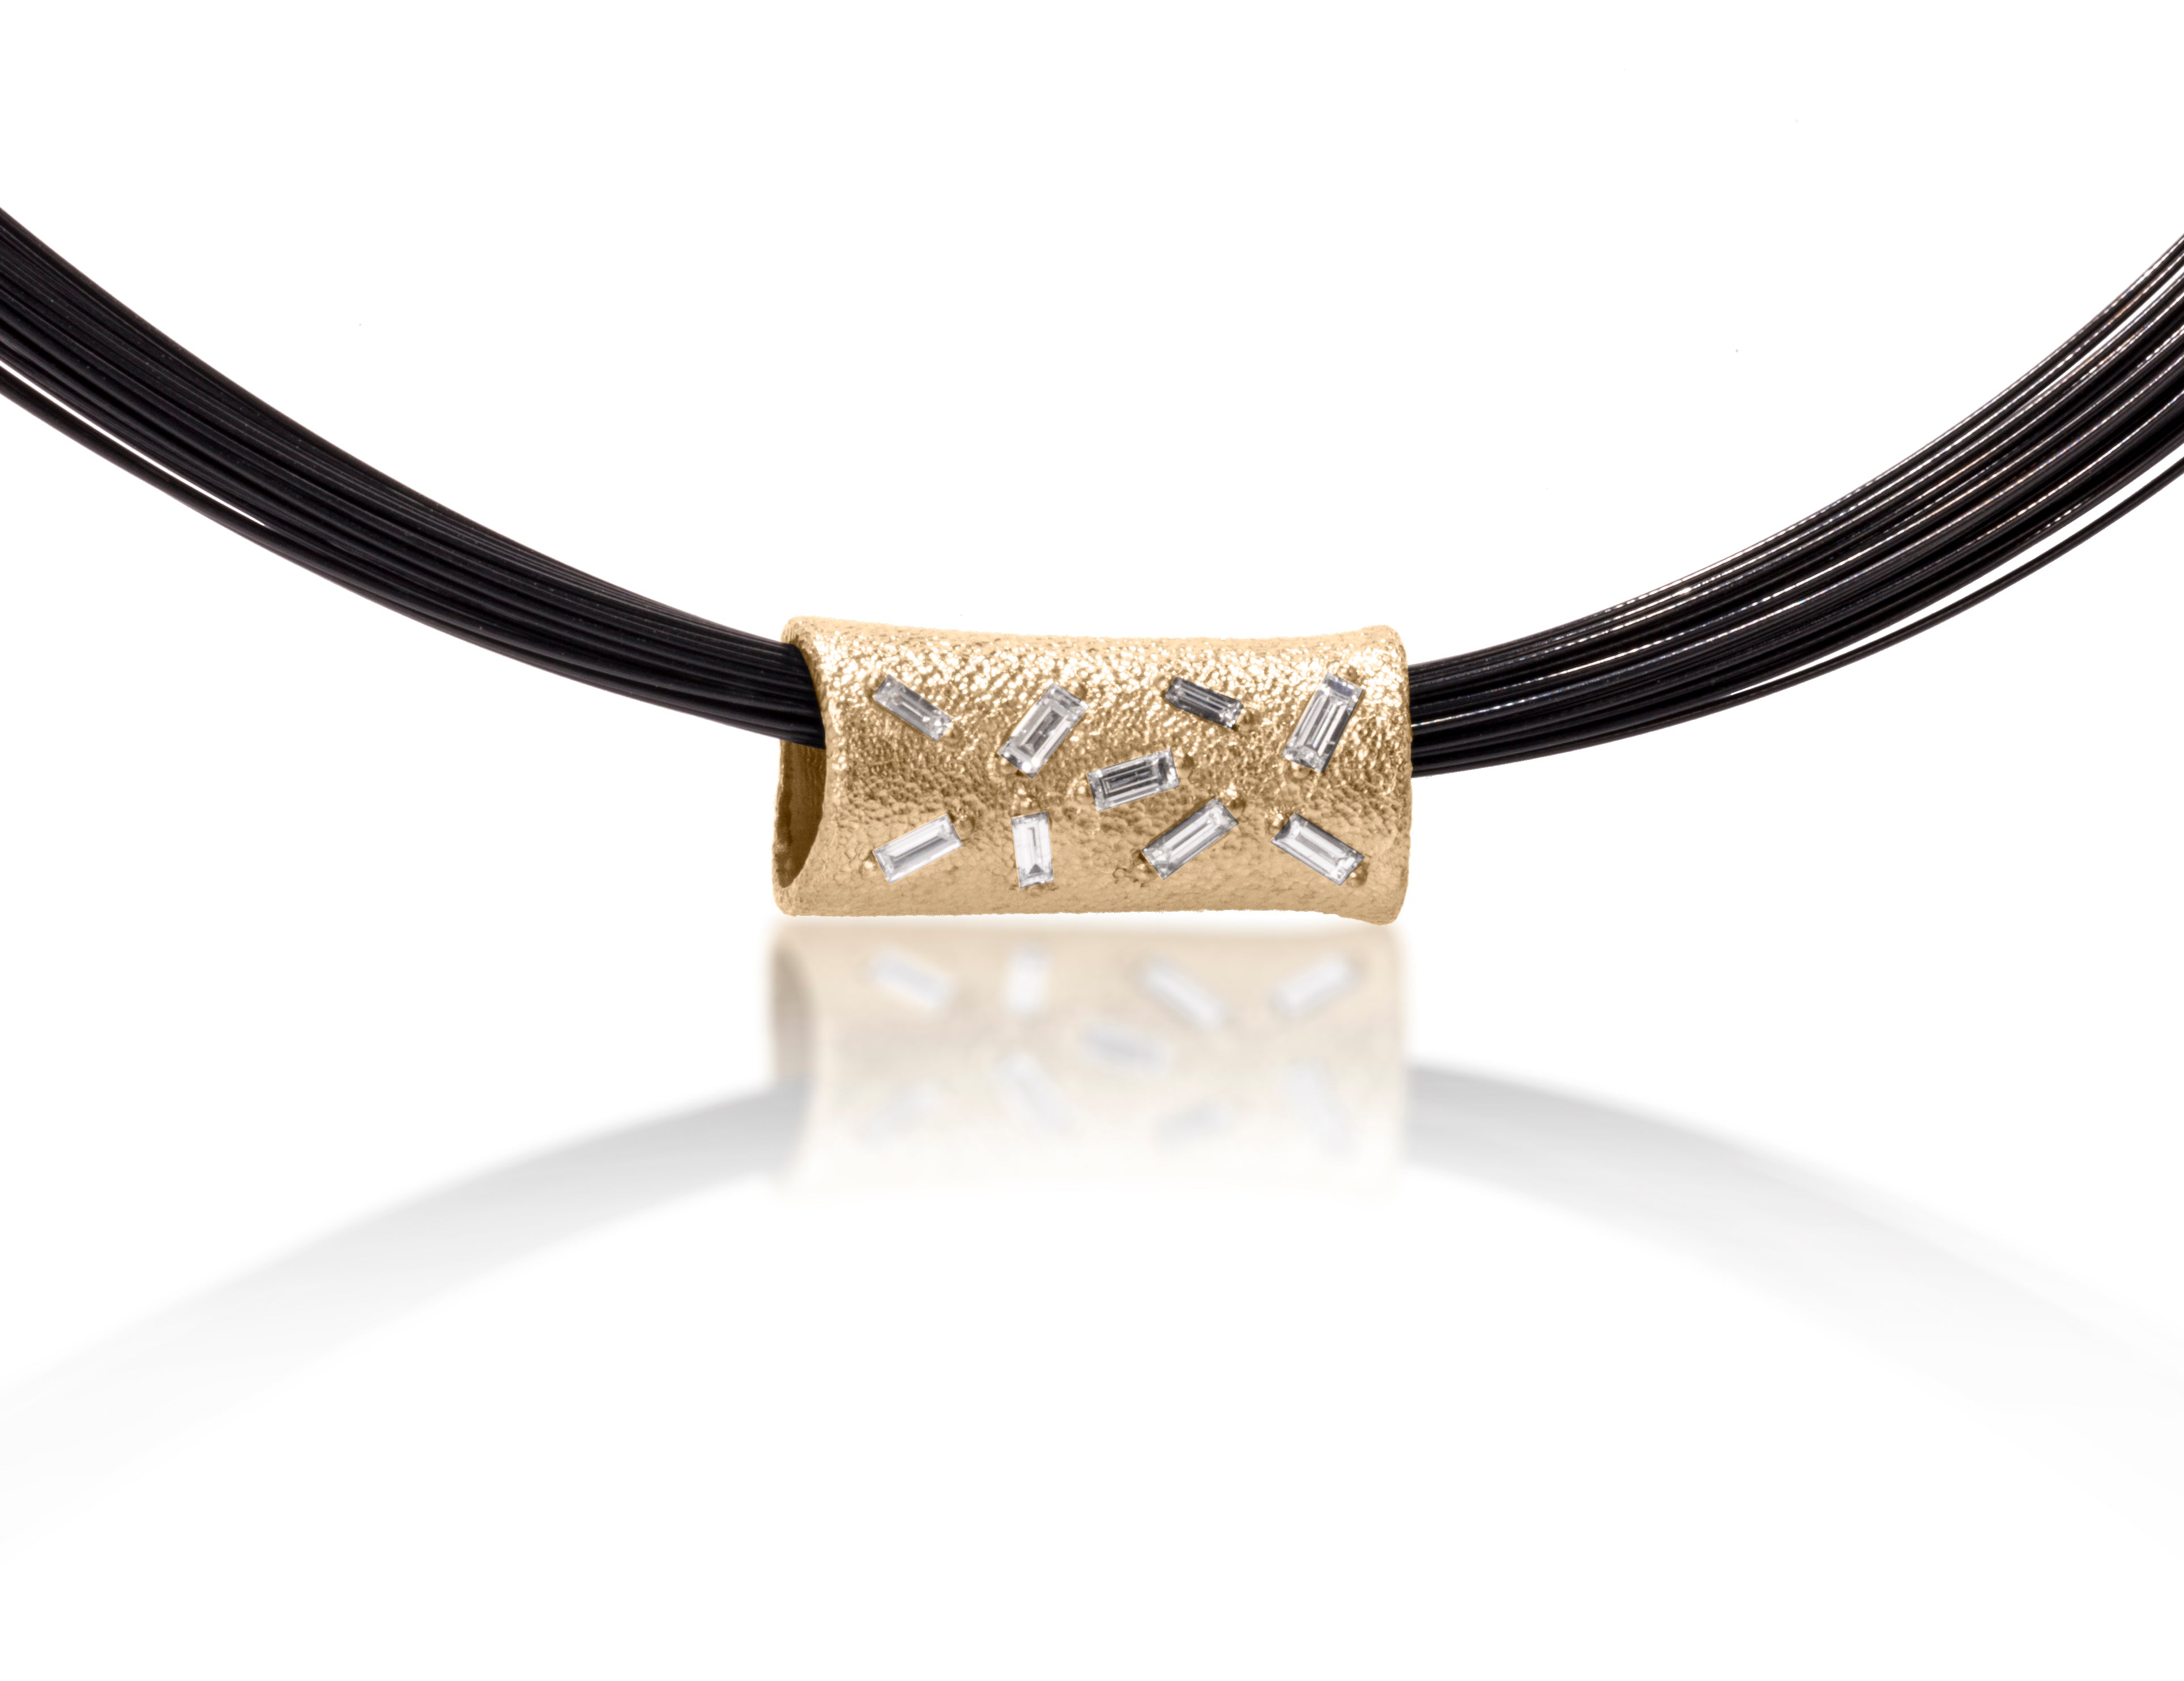 Richly textured and simply engineered to hang with diamonds forward, this piece is available in three color ways, oxidized silver, 18k gold and palladium.  This elegant pendant is set with 9 white diamond baguettes. 0.287 tcw.